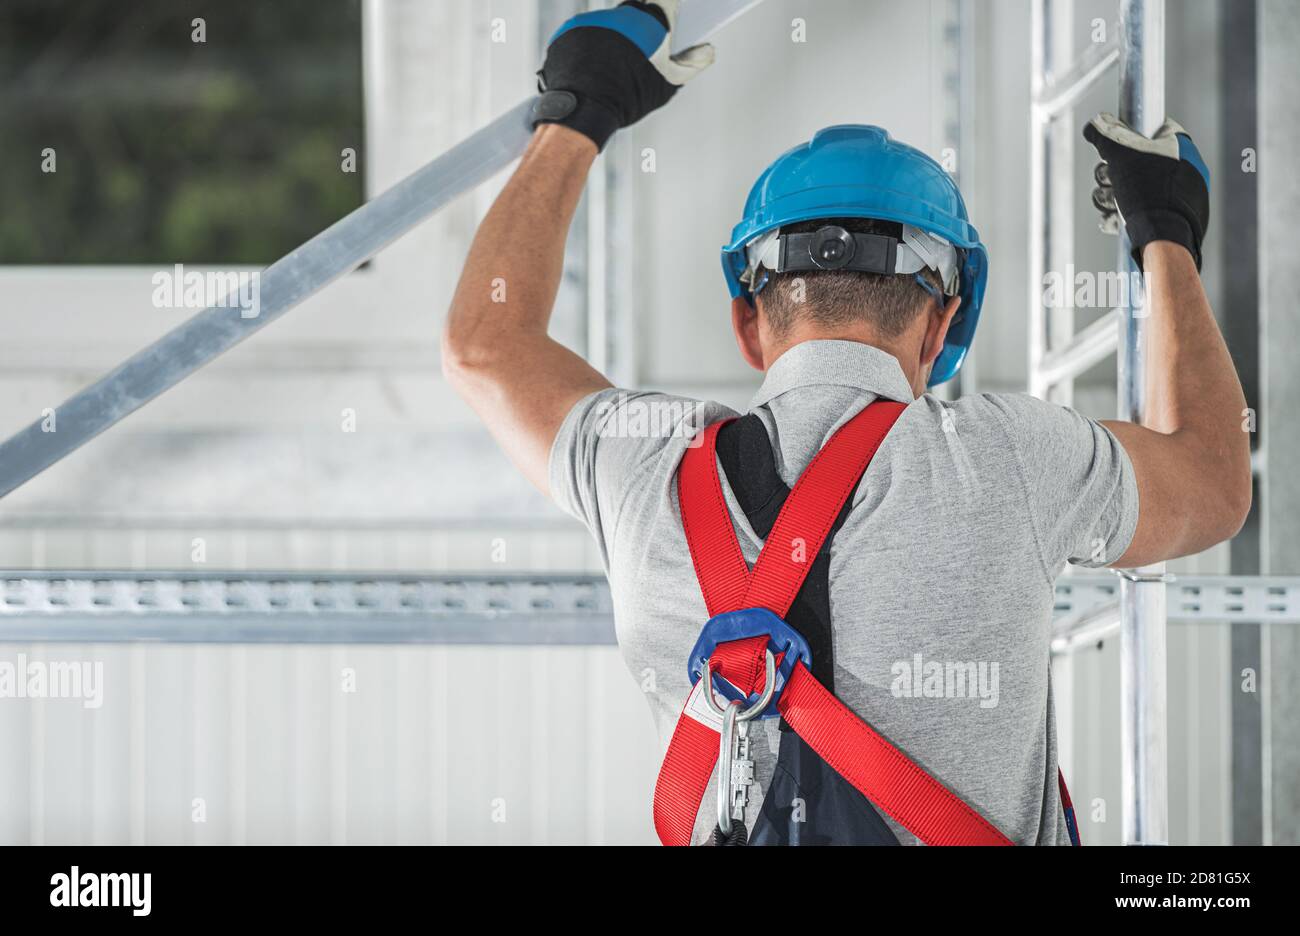 Construction Worker Wearing Safety Harness Climbing on Aluminium Scaffolding  In the Construction Zone Stock Photo - Alamy